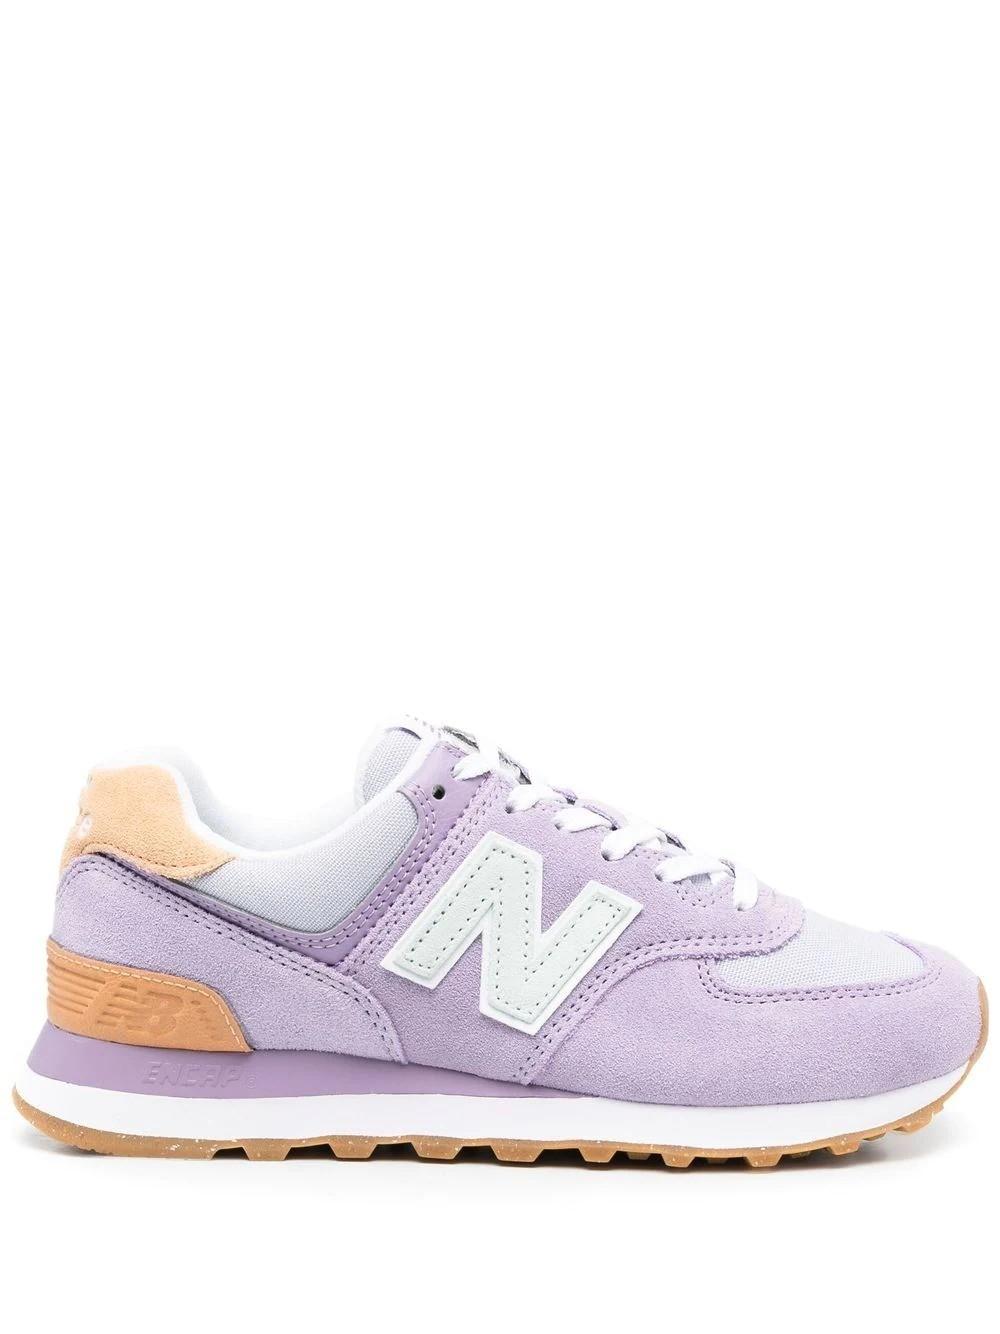 New Balance Suede 574 Low-top Sneakers in Purple | Lyst